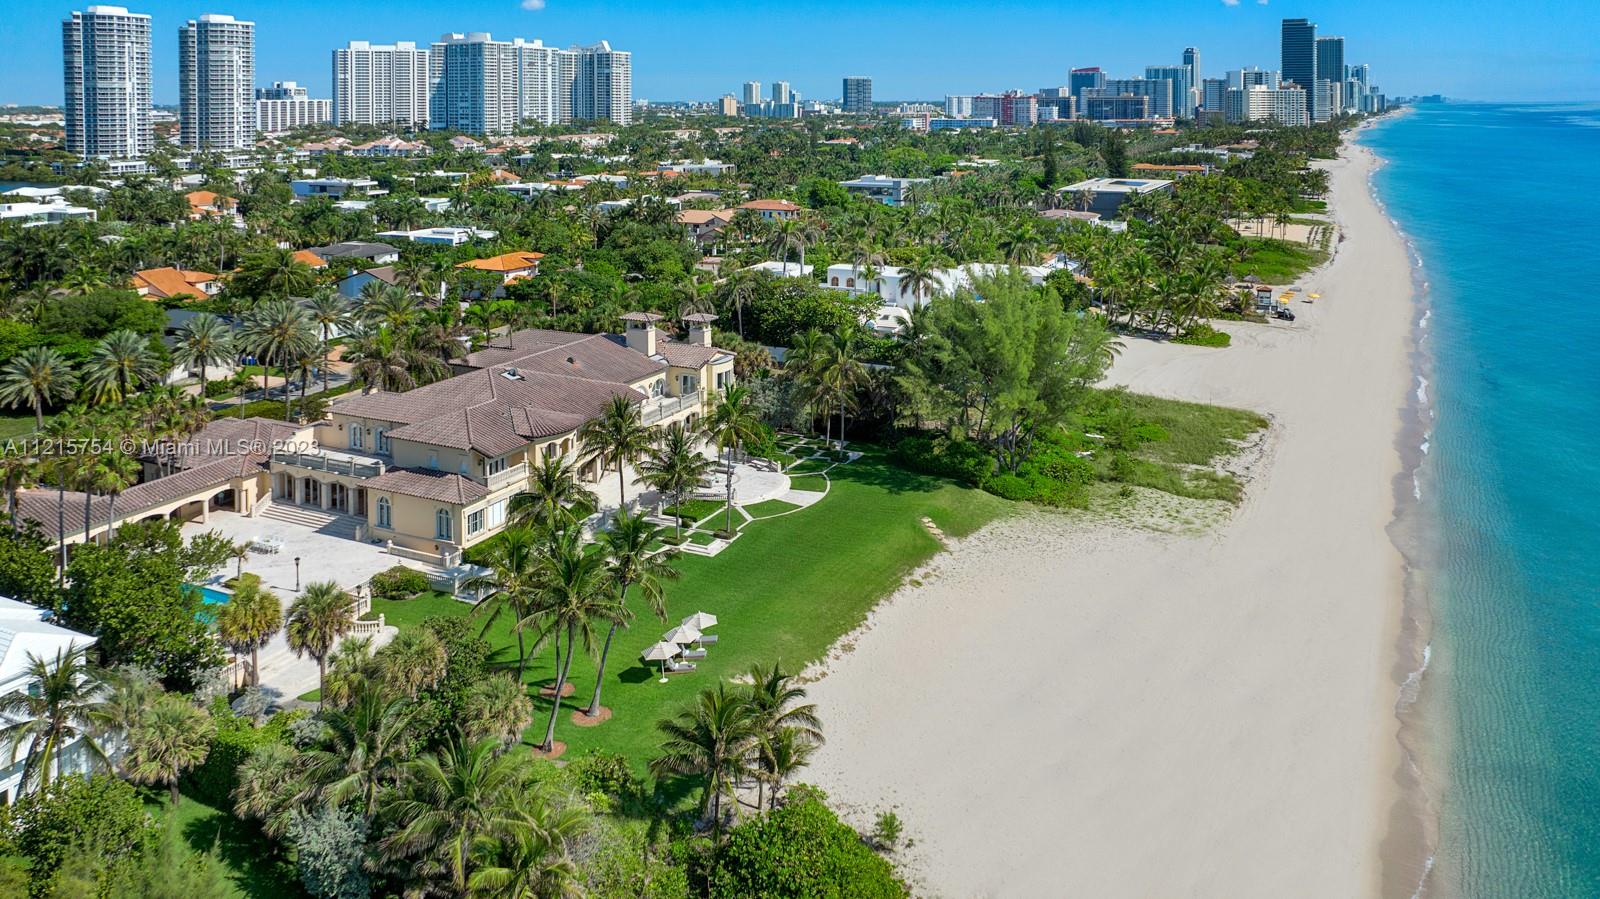 A Compound on the sands of Golden Beach princely positioned for the privacy seeker. With 250 linear feet of ocean frontage and 1.5 acres, this mega estate is the largest oceanfront property in Miami. Decorator ready with APPROVED plans and permits for a 10 bed, 3 staff room, 6 car garage, 30K SF+ Mansion. With 5 bedrooms facing the ocean, along with all key living areas and 11ft-23ft ceilings throughout, the spacial planning was light years ahead. Seaside breezes are appreciated from the loggia, poolside cabana, 58ft swimming pool, grand veranda, and a lovely green lawn. On the market for the first time in nearly 40 years, this one-of-one trophy exudes Palm Beach elegance amidst Golden Beach’s prized amenities: private beach, tennis courts, clubhouse & its own police force.